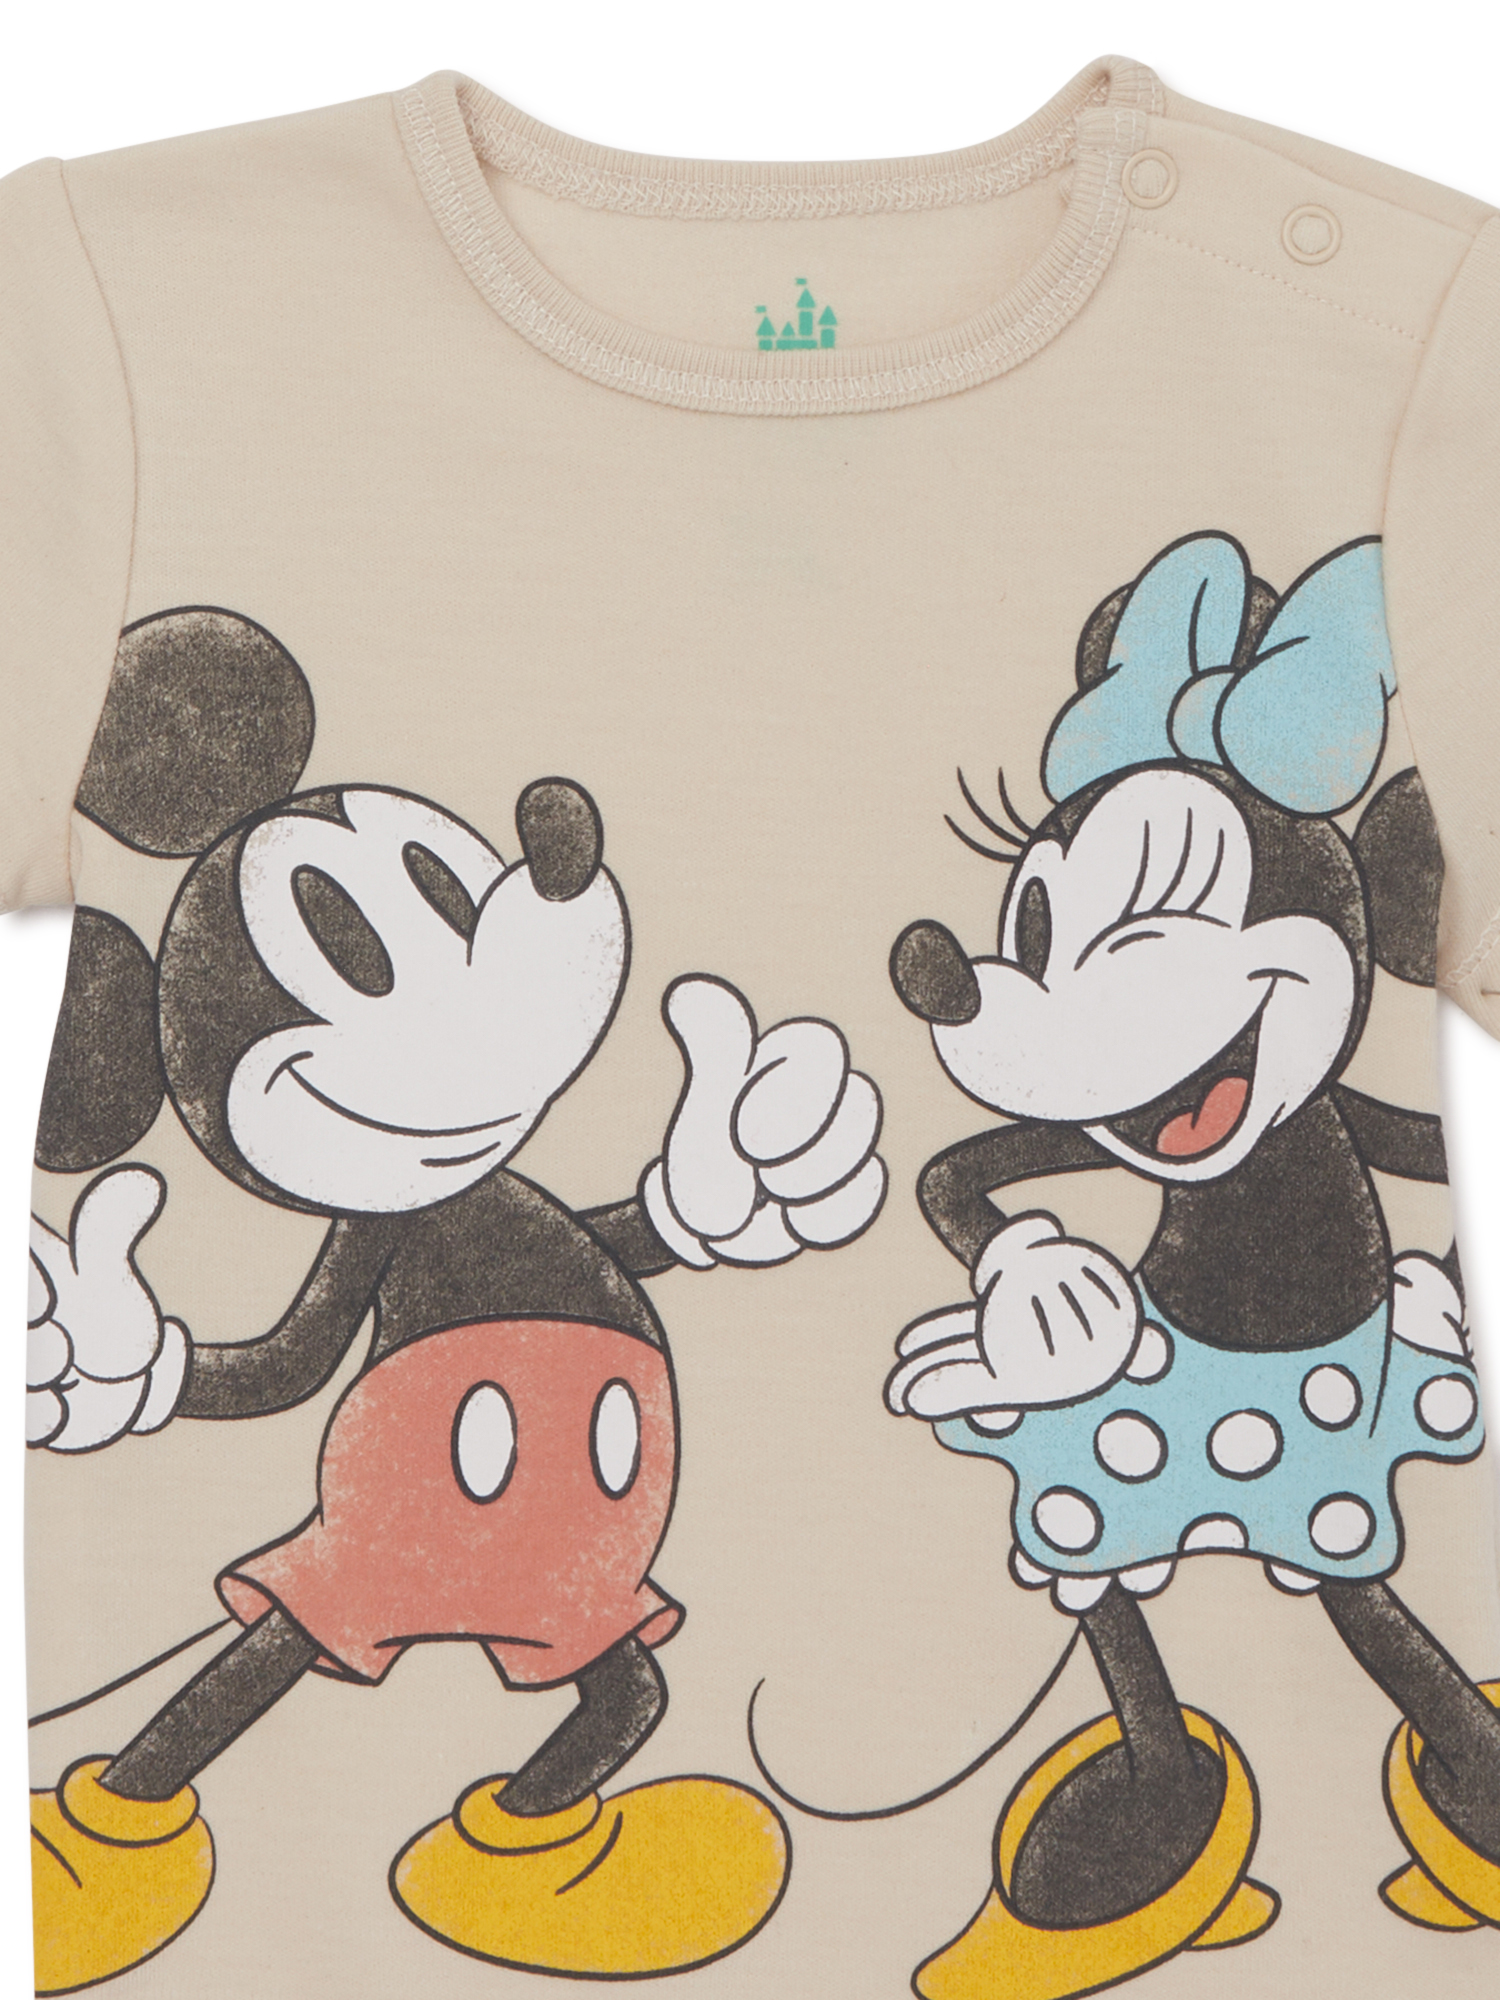 Mickey & Friends Baby Bodysuits with Short Sleeves, 2-Pack, Sizes 0/3M-24M - image 2 of 3